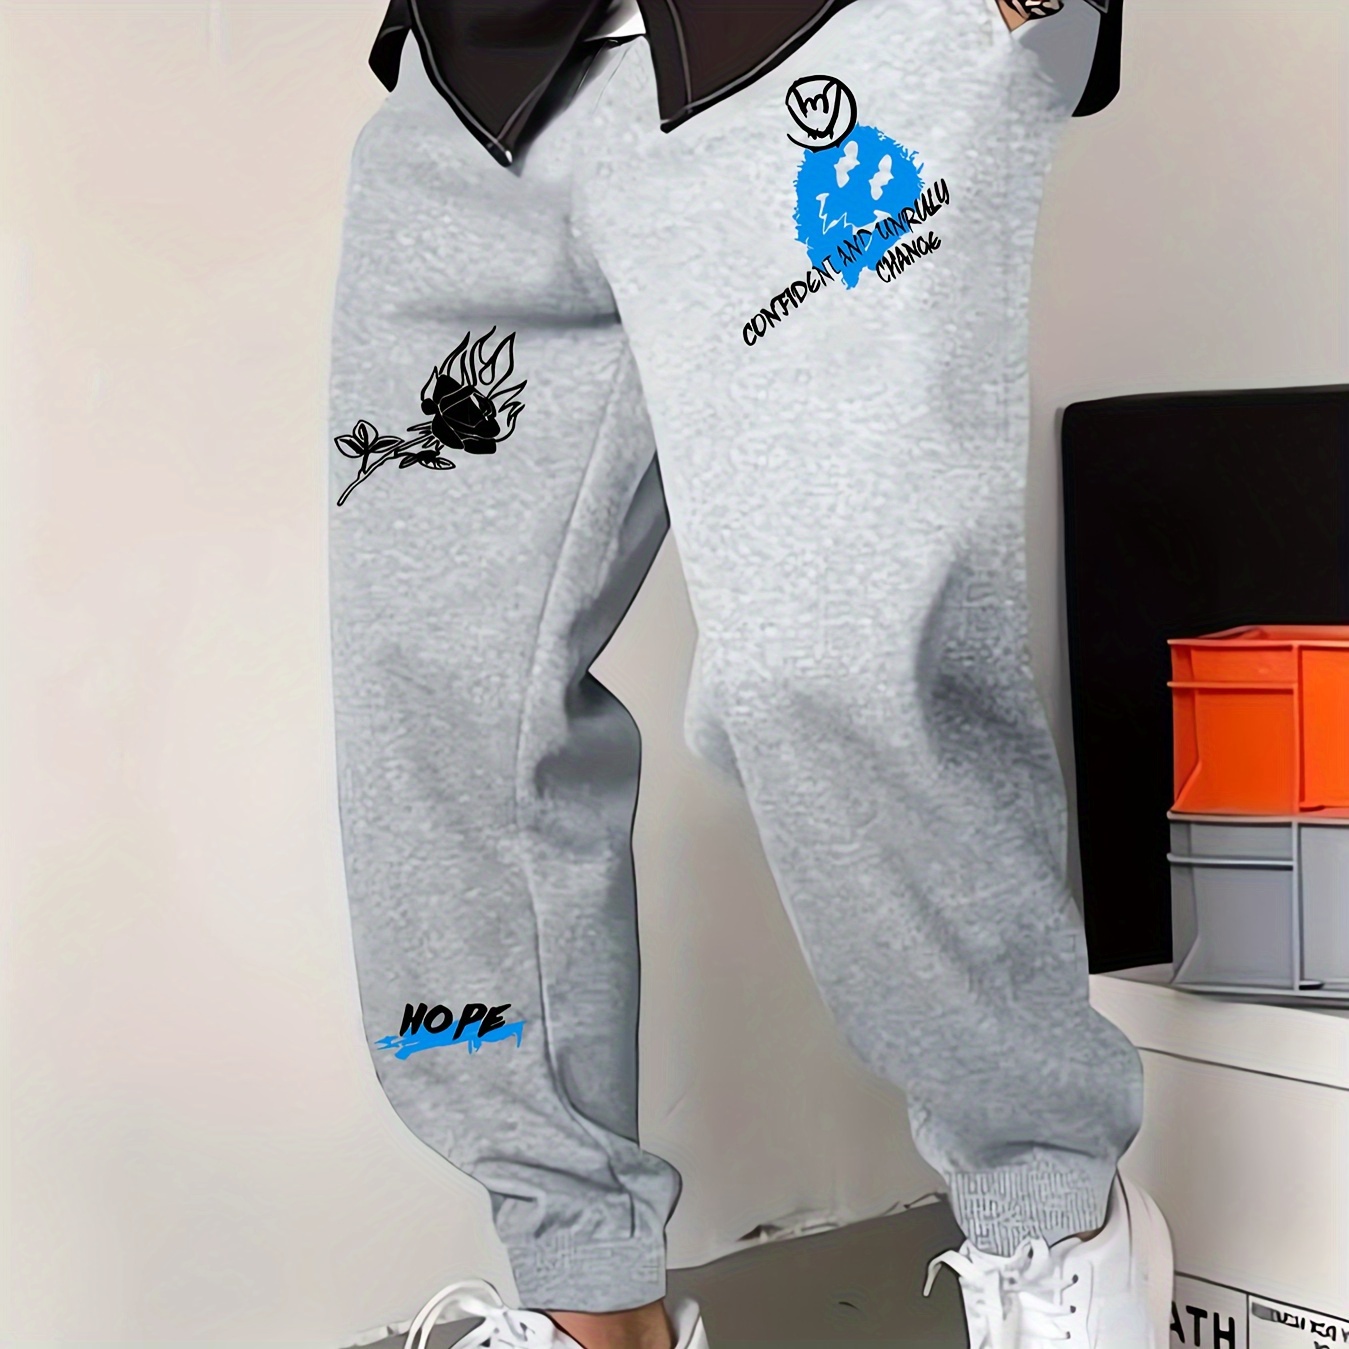 

Nope Blue Emoticon Print Men's Pants Drawstring Sweatpants Loose Casual Trousers For Spring Autumn Running Jogging